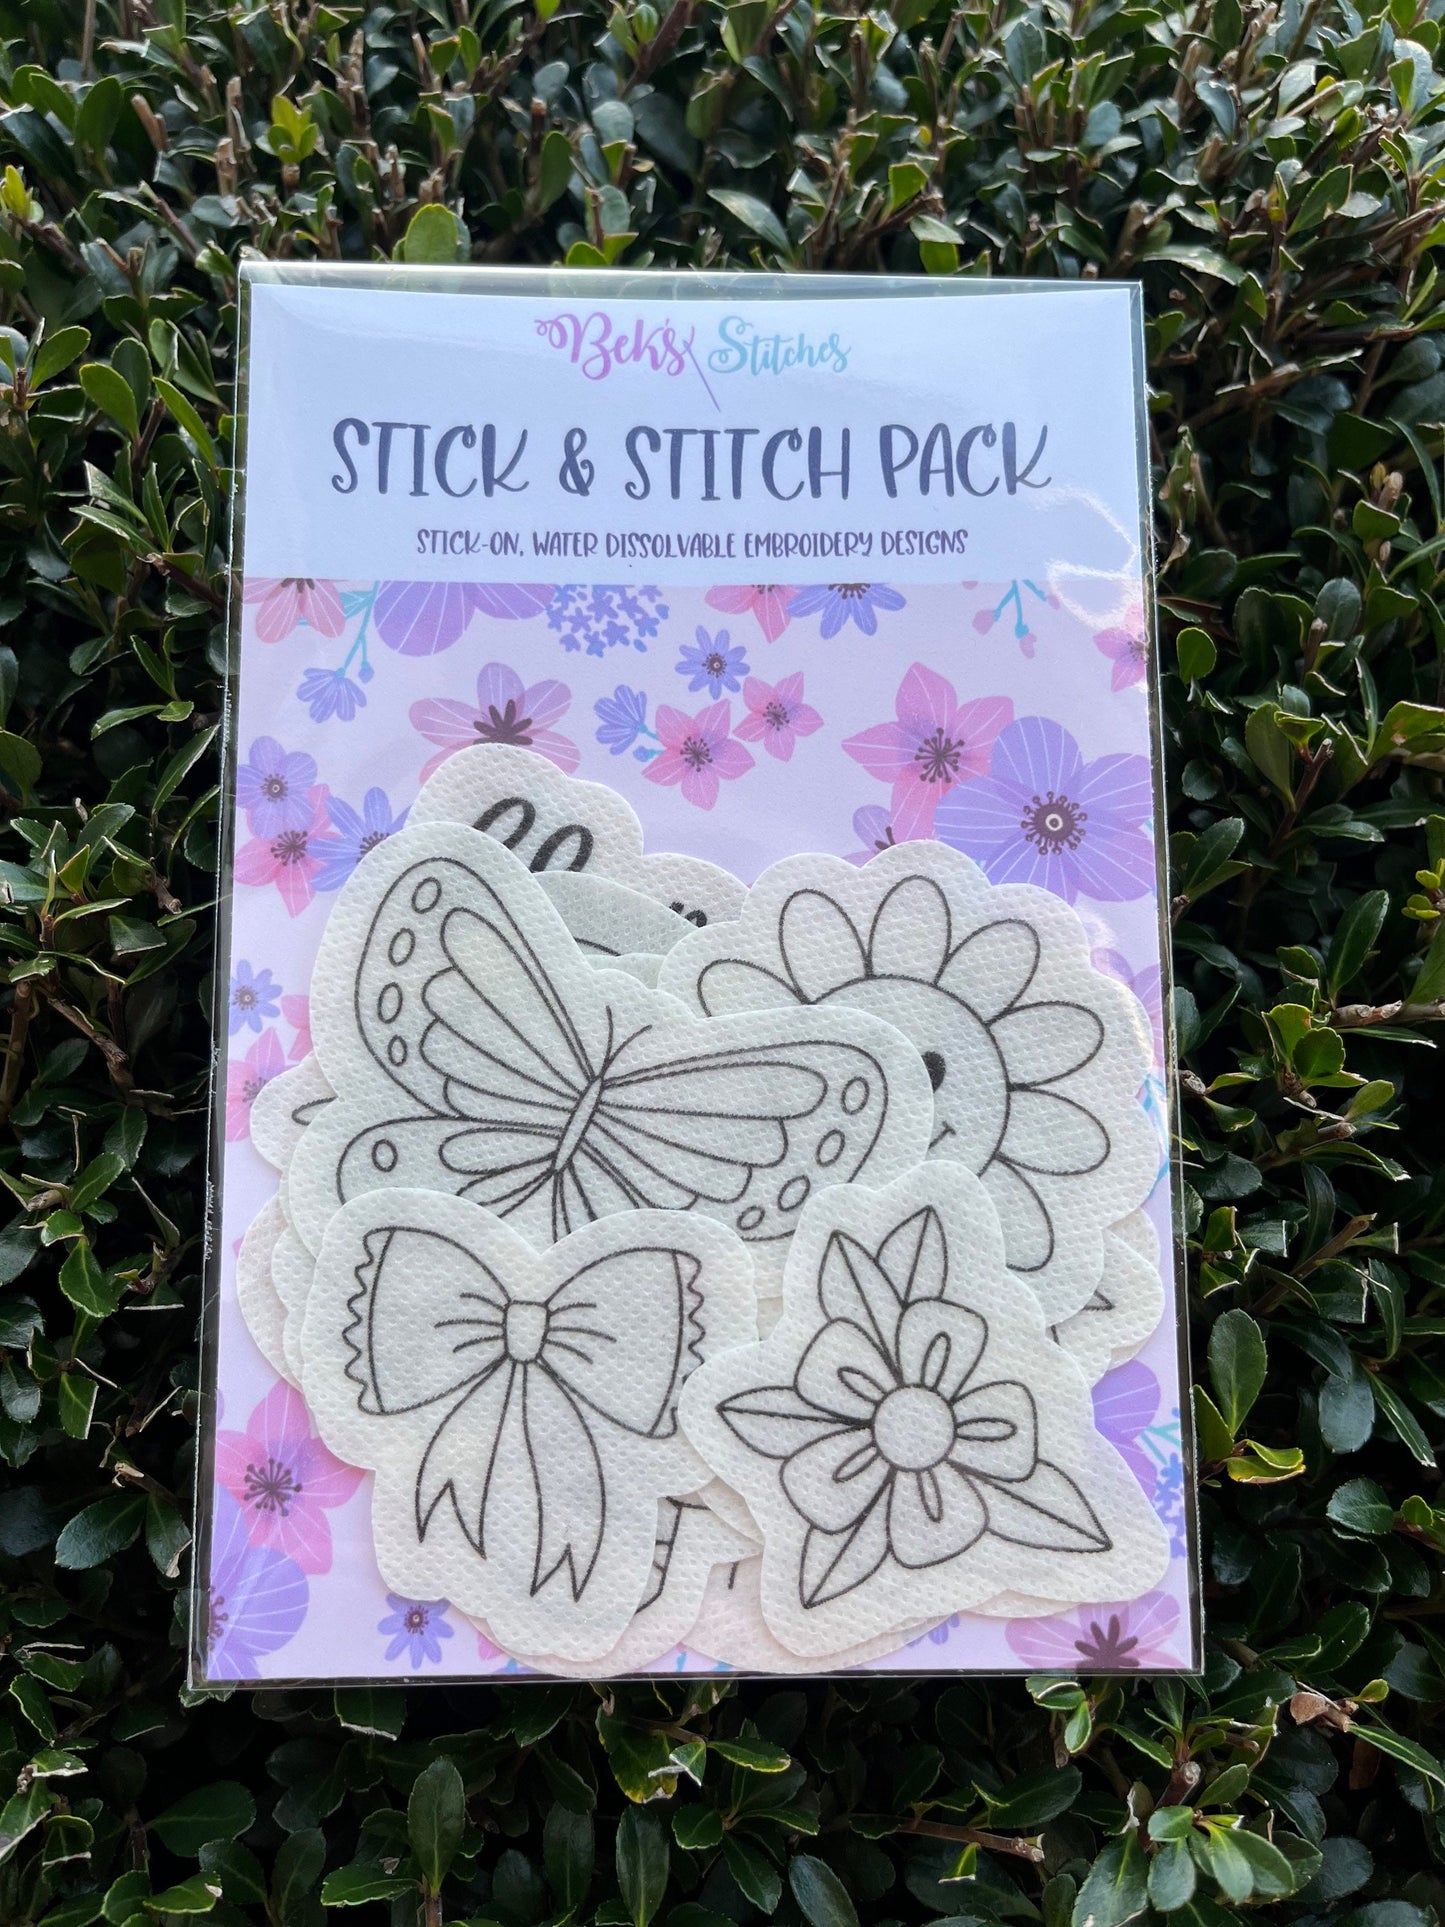 Spring Stick and Stitch Pack, Water-Soluble Dissolving Stick-On Embroidery Designs